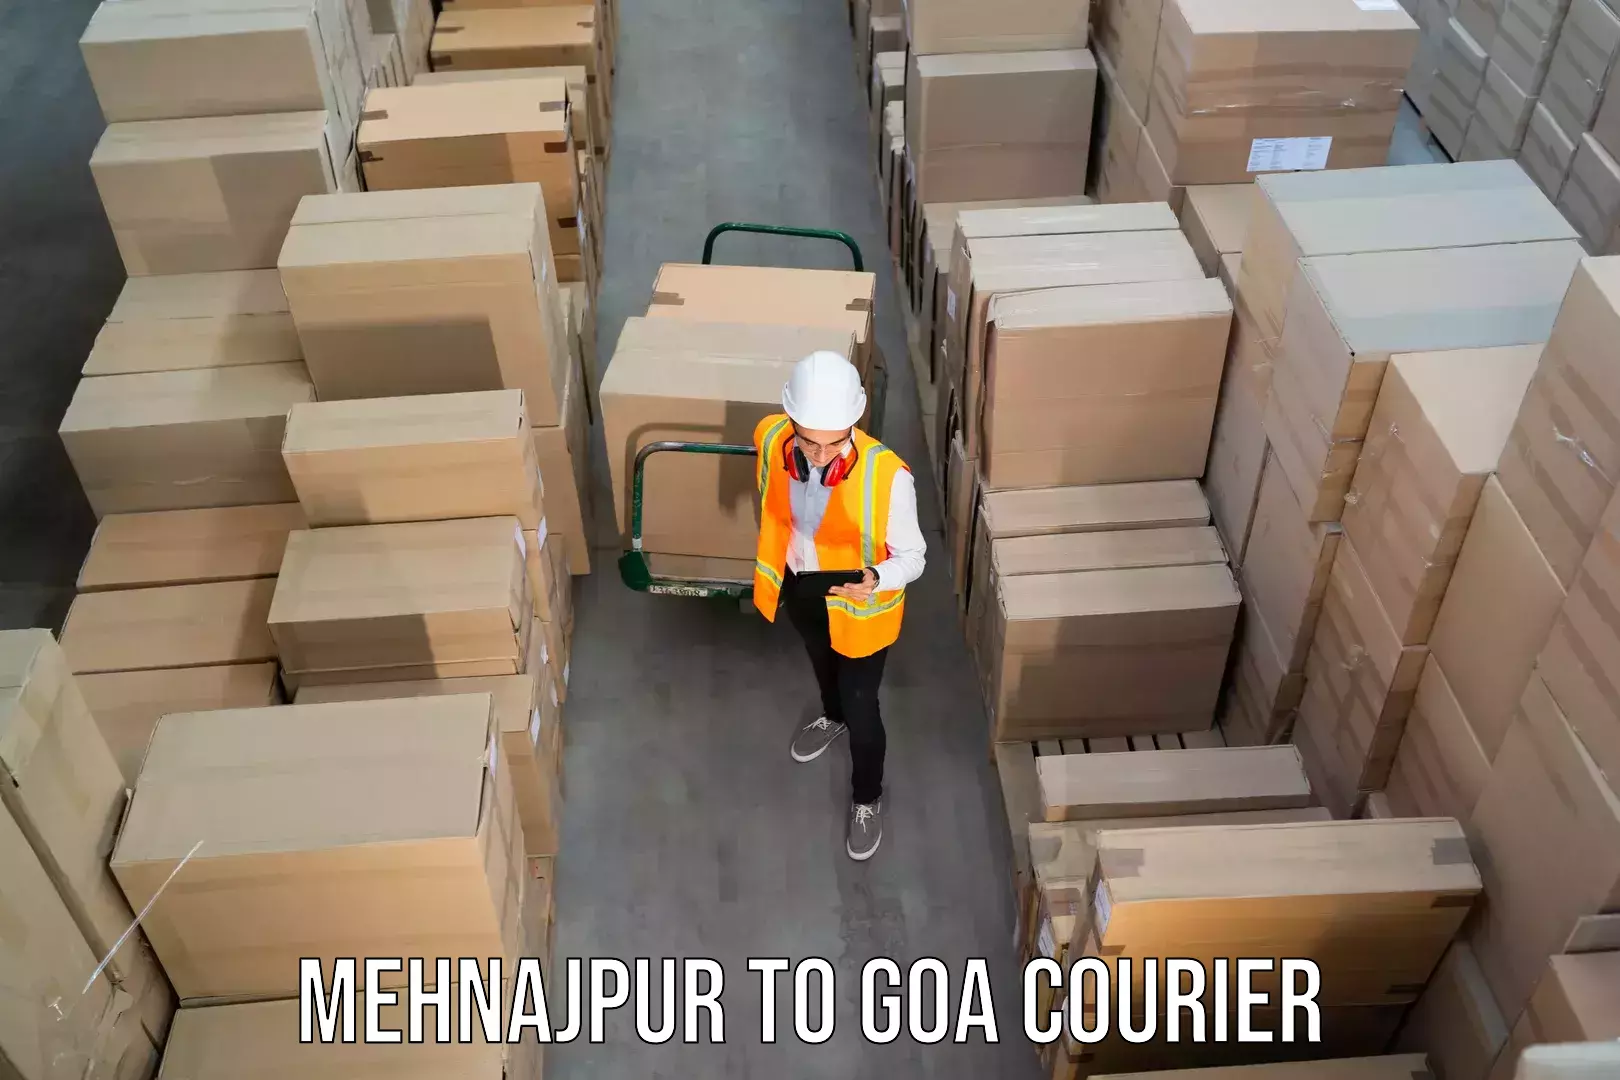 Parcel service for businesses Mehnajpur to Panaji